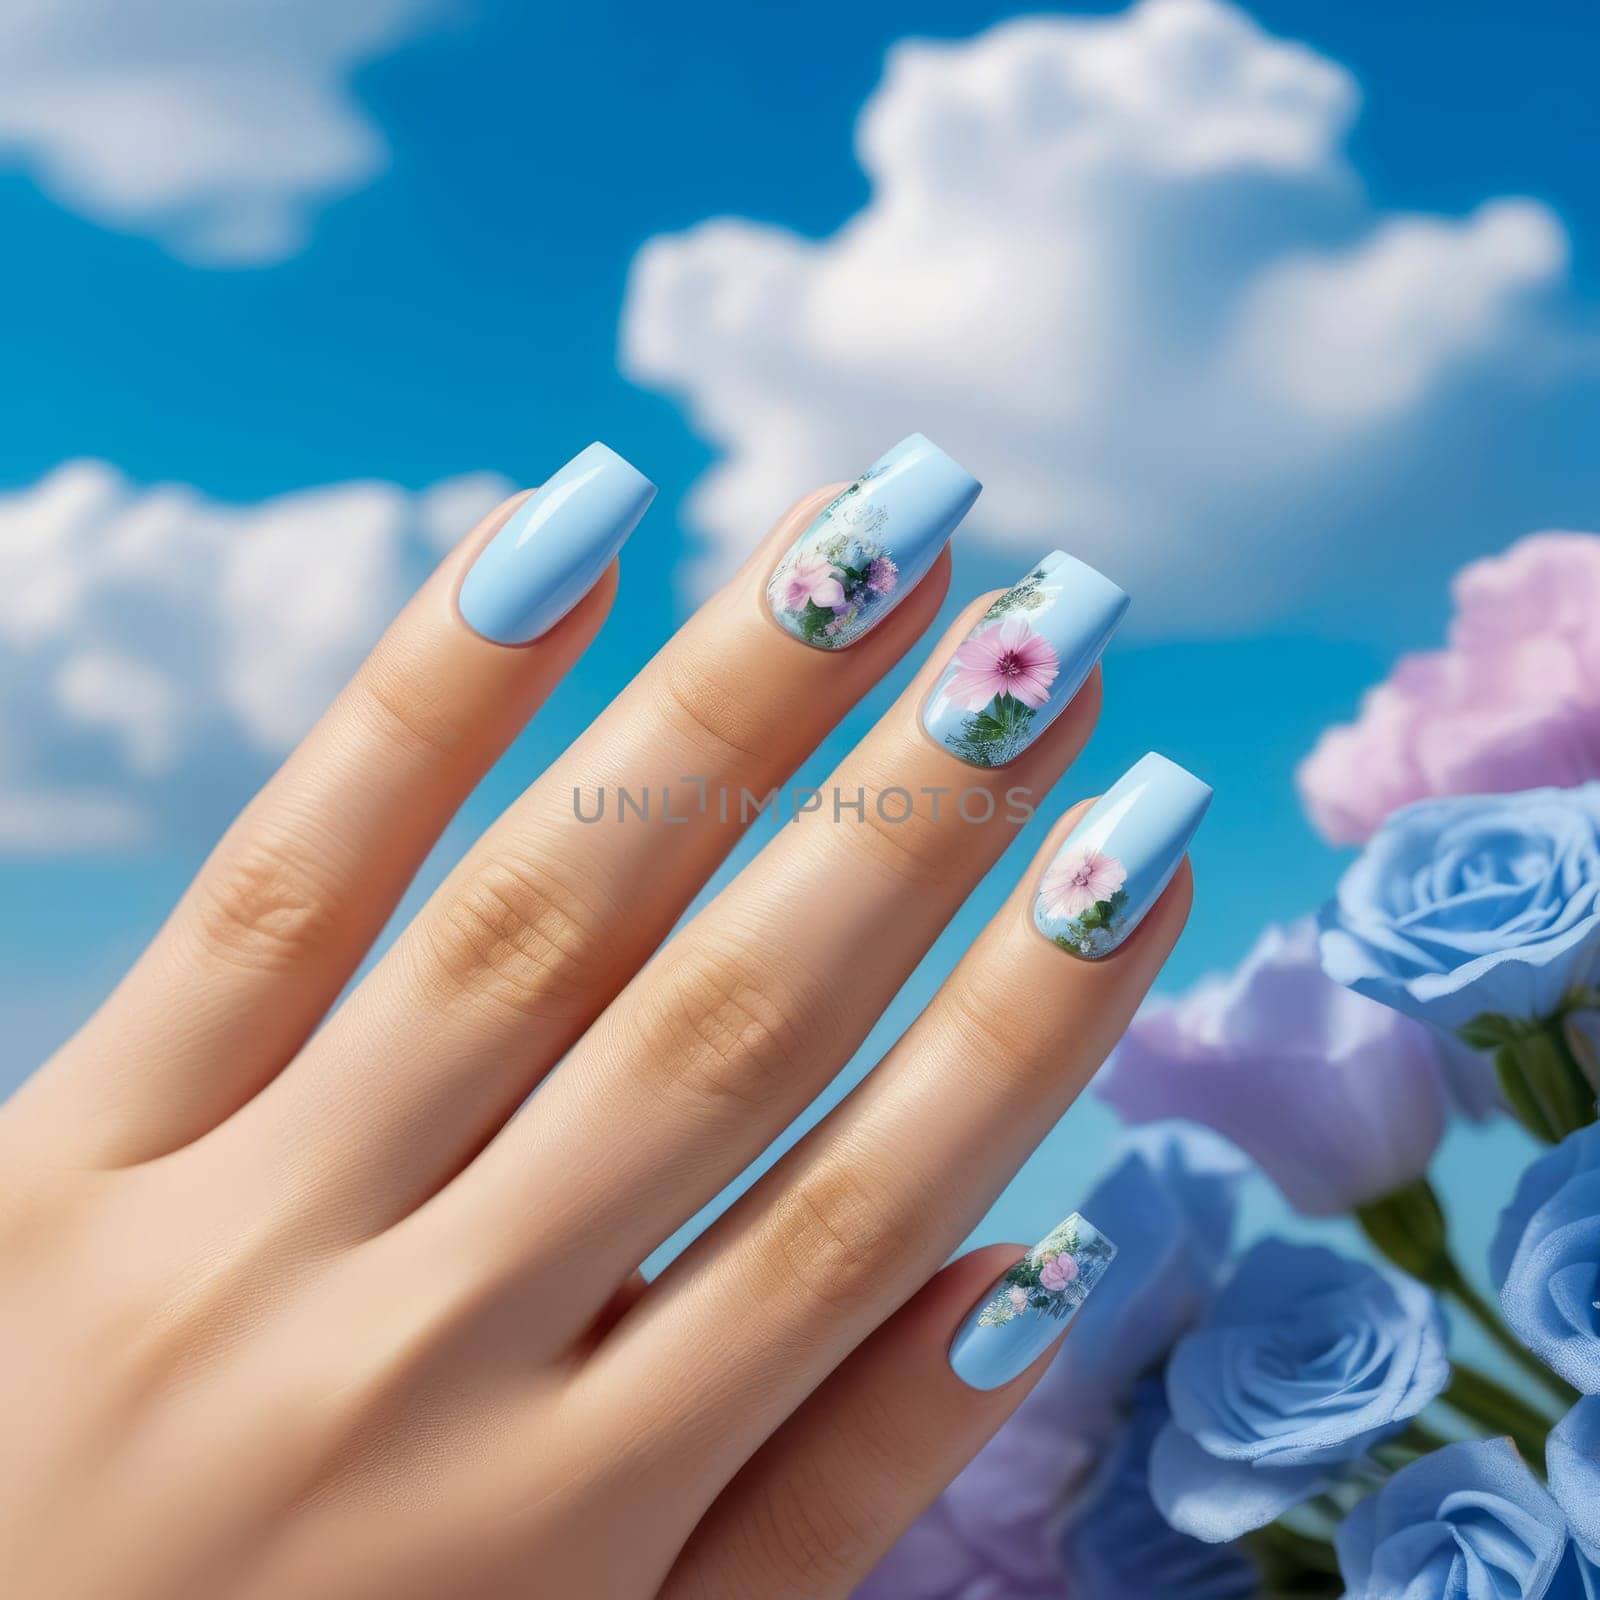 Nail design idea with square shape, pastel blue and pink tones, flowers against summer sky.